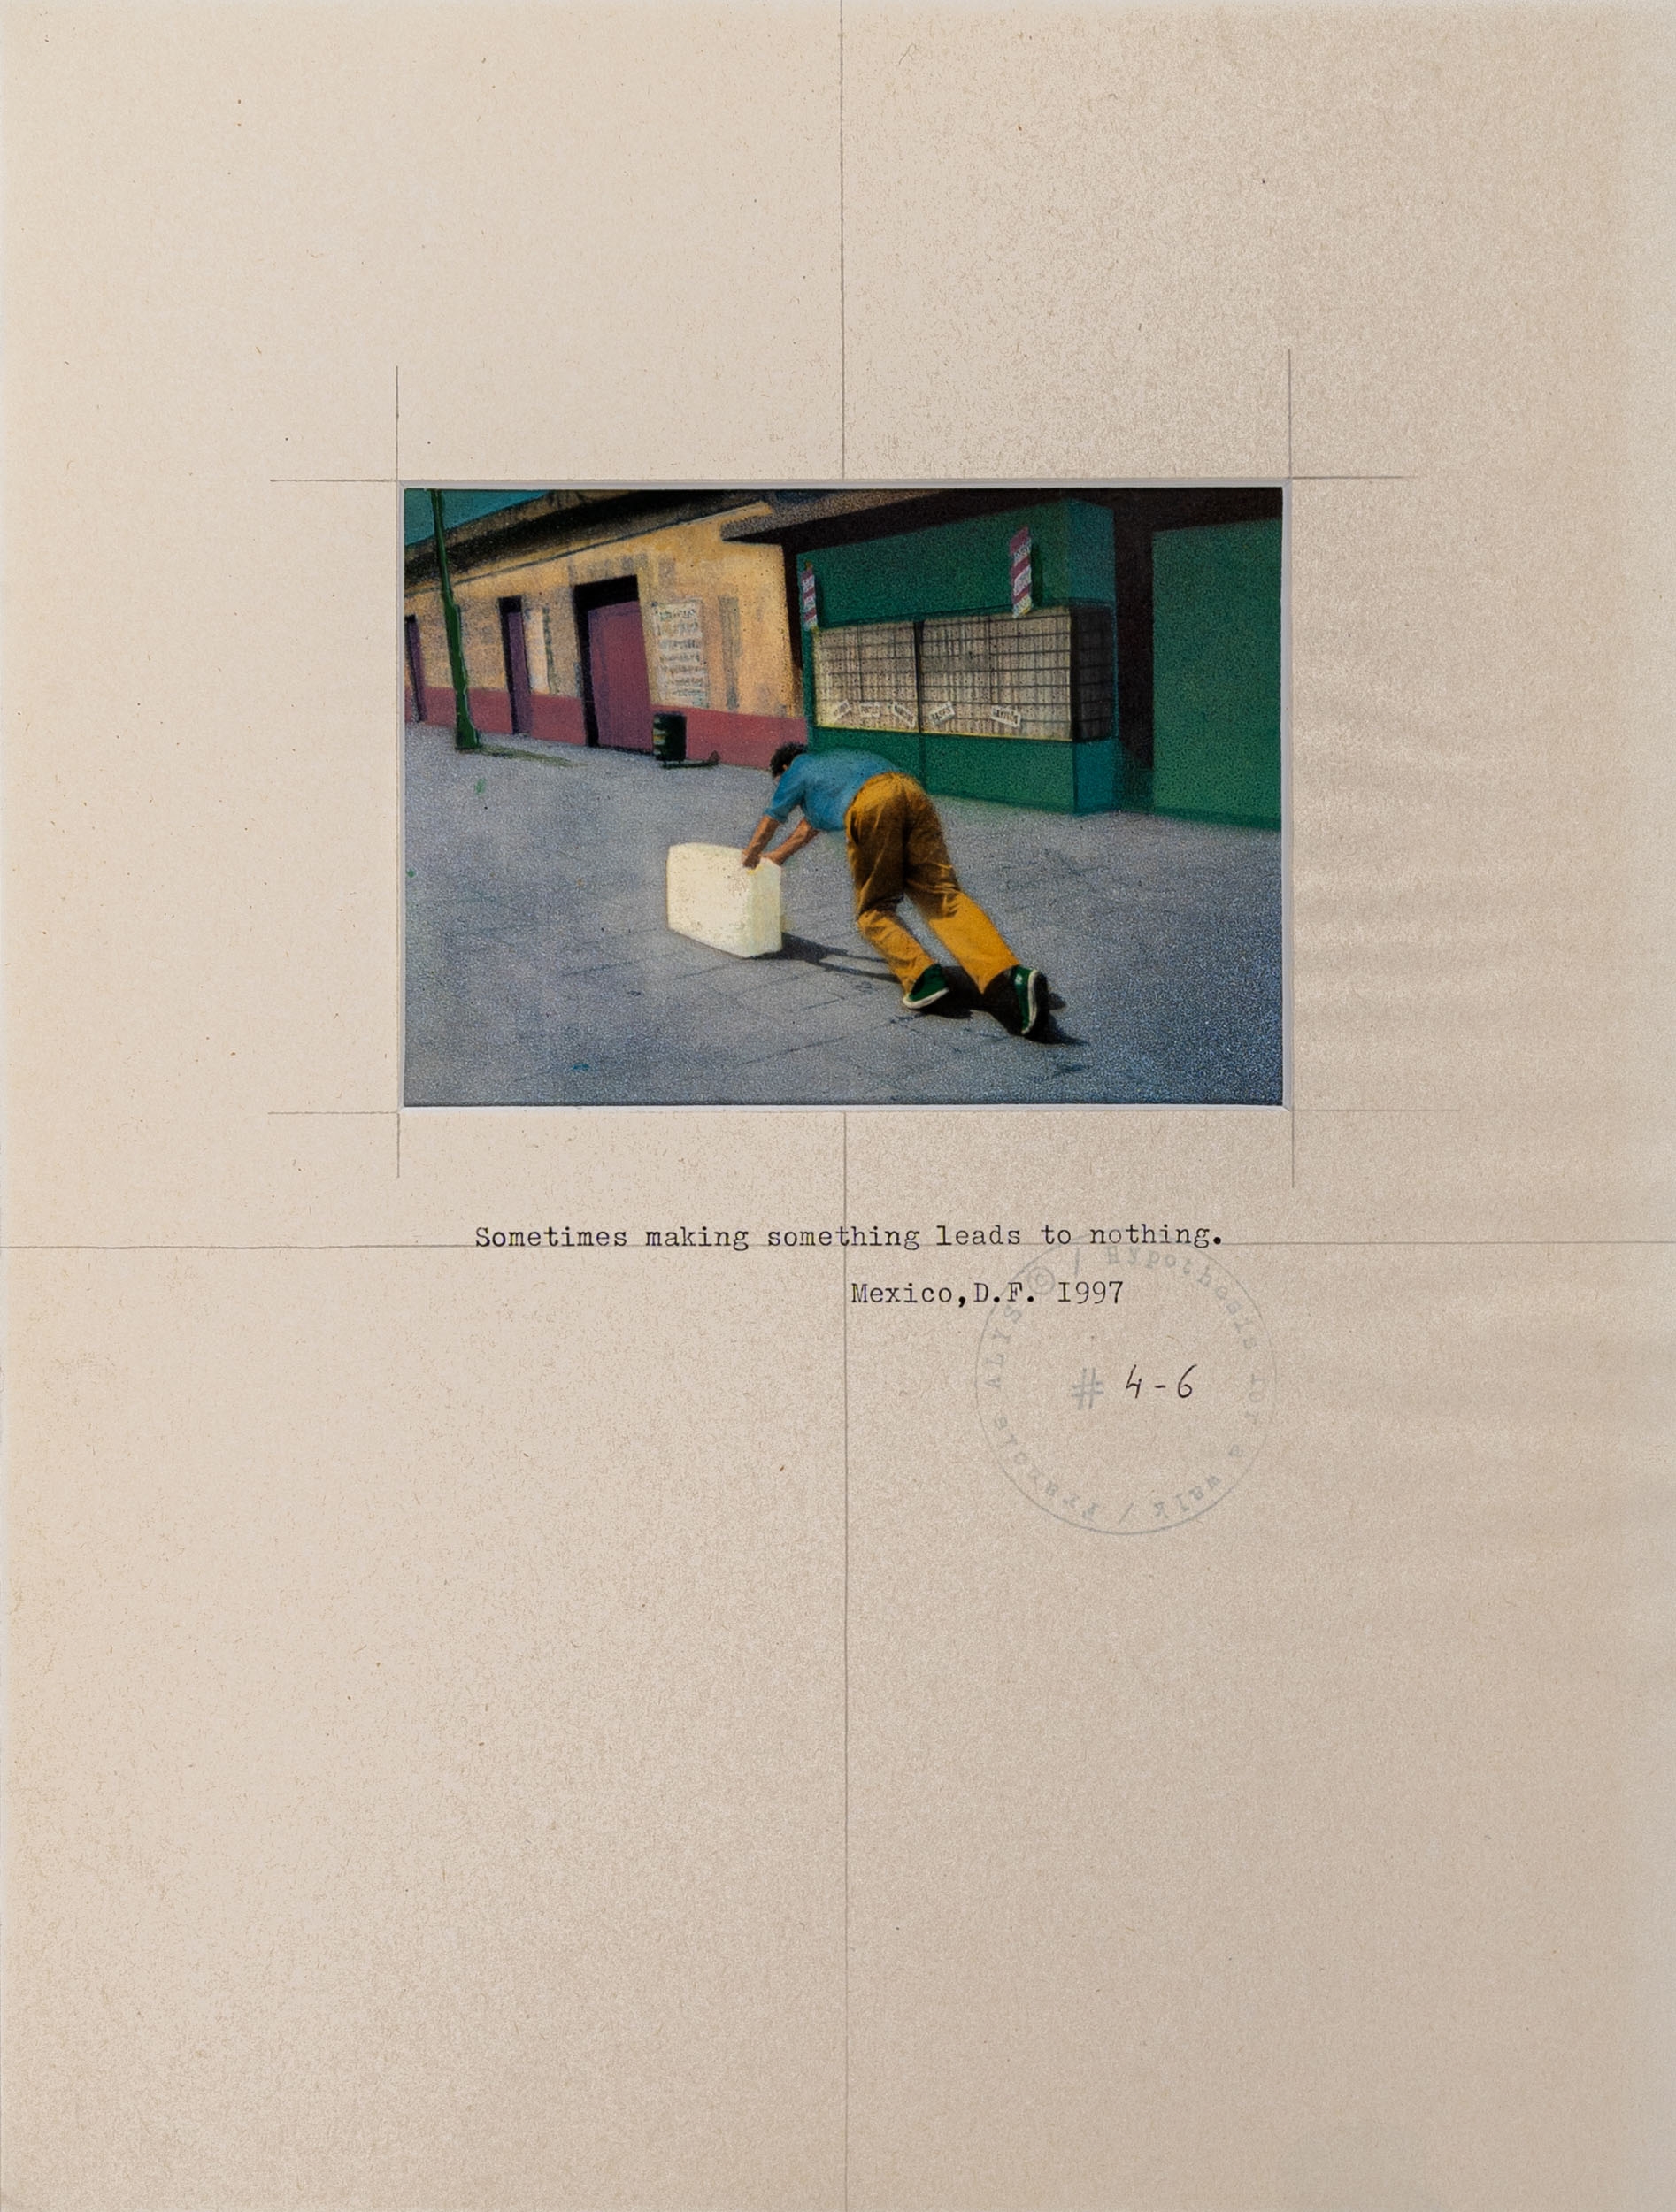 Artwork by Francis Alÿs, Untitled (study for Sometimes making something leads to nothing), Made of Retouched photograph on Chromalin